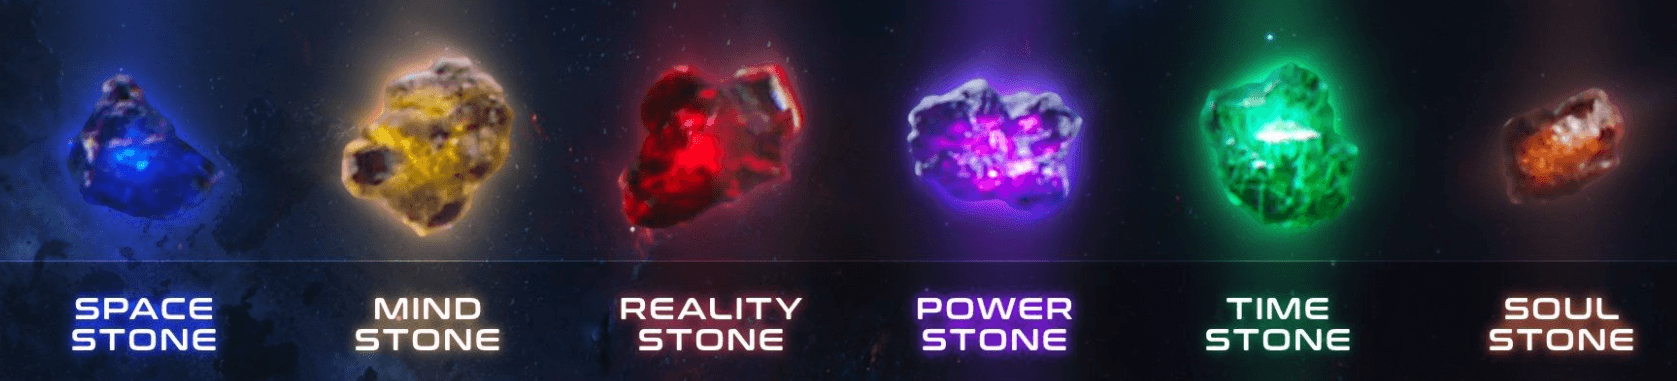 Space stone